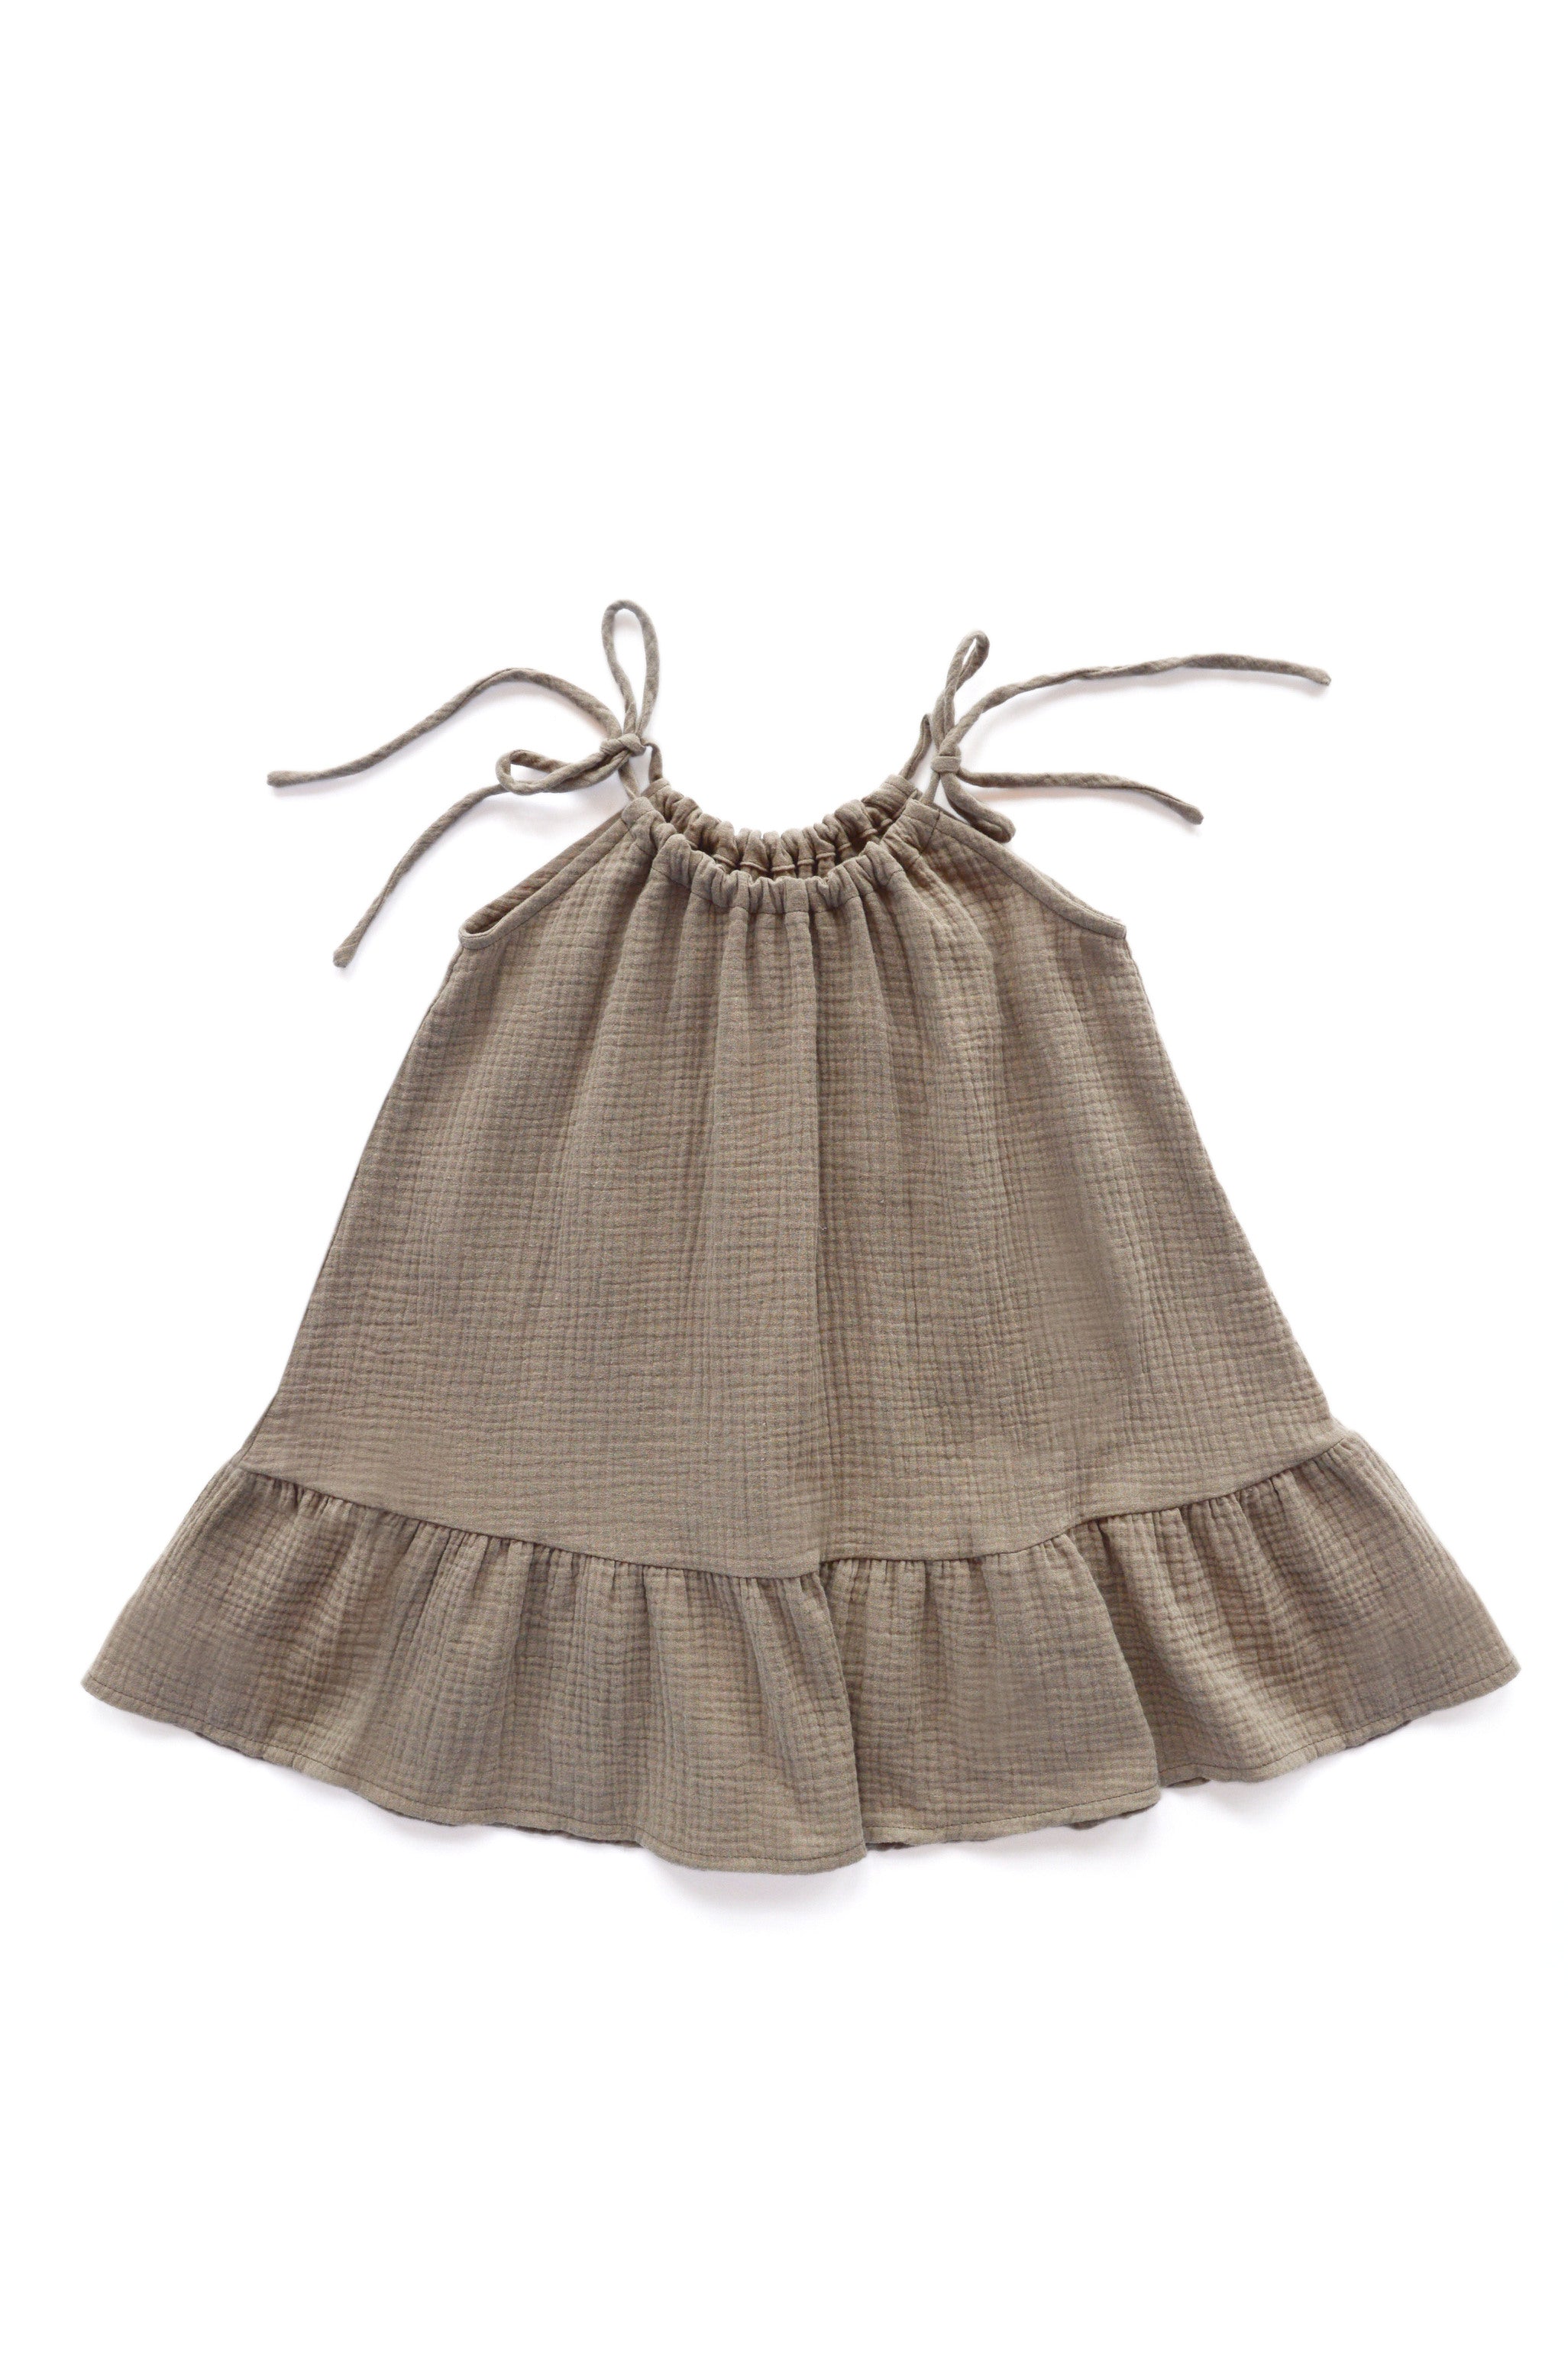 Sustainable girl's dress from lightweight, breathable organic muslin (GOTS) in dusty pink color. Handcrafted with love, made with no nasties, and allergy free. Mommy and me styles are available. Perfect for hot and humid weather and beach holidays.